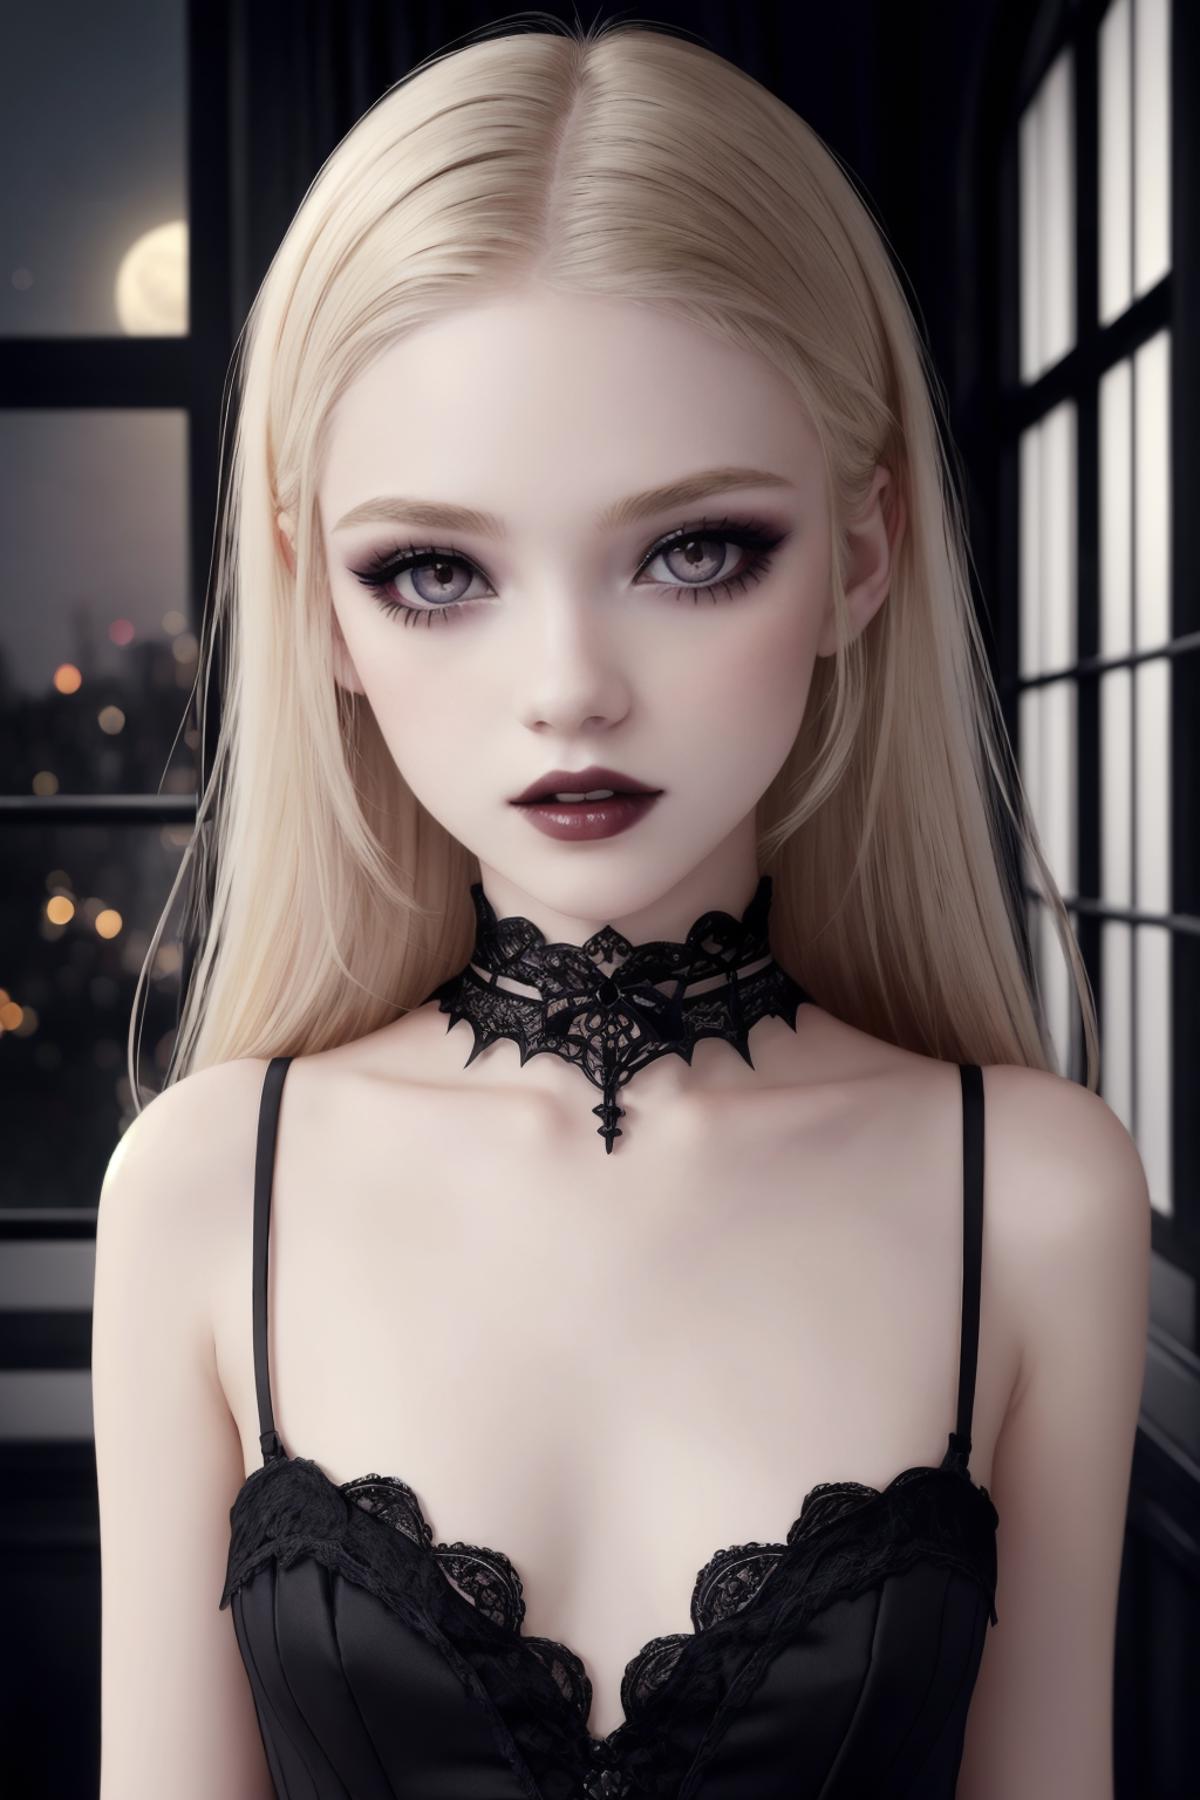 White-skinned doll with black hair, lips, and eyelashes wearing black lingerie and a black choker.